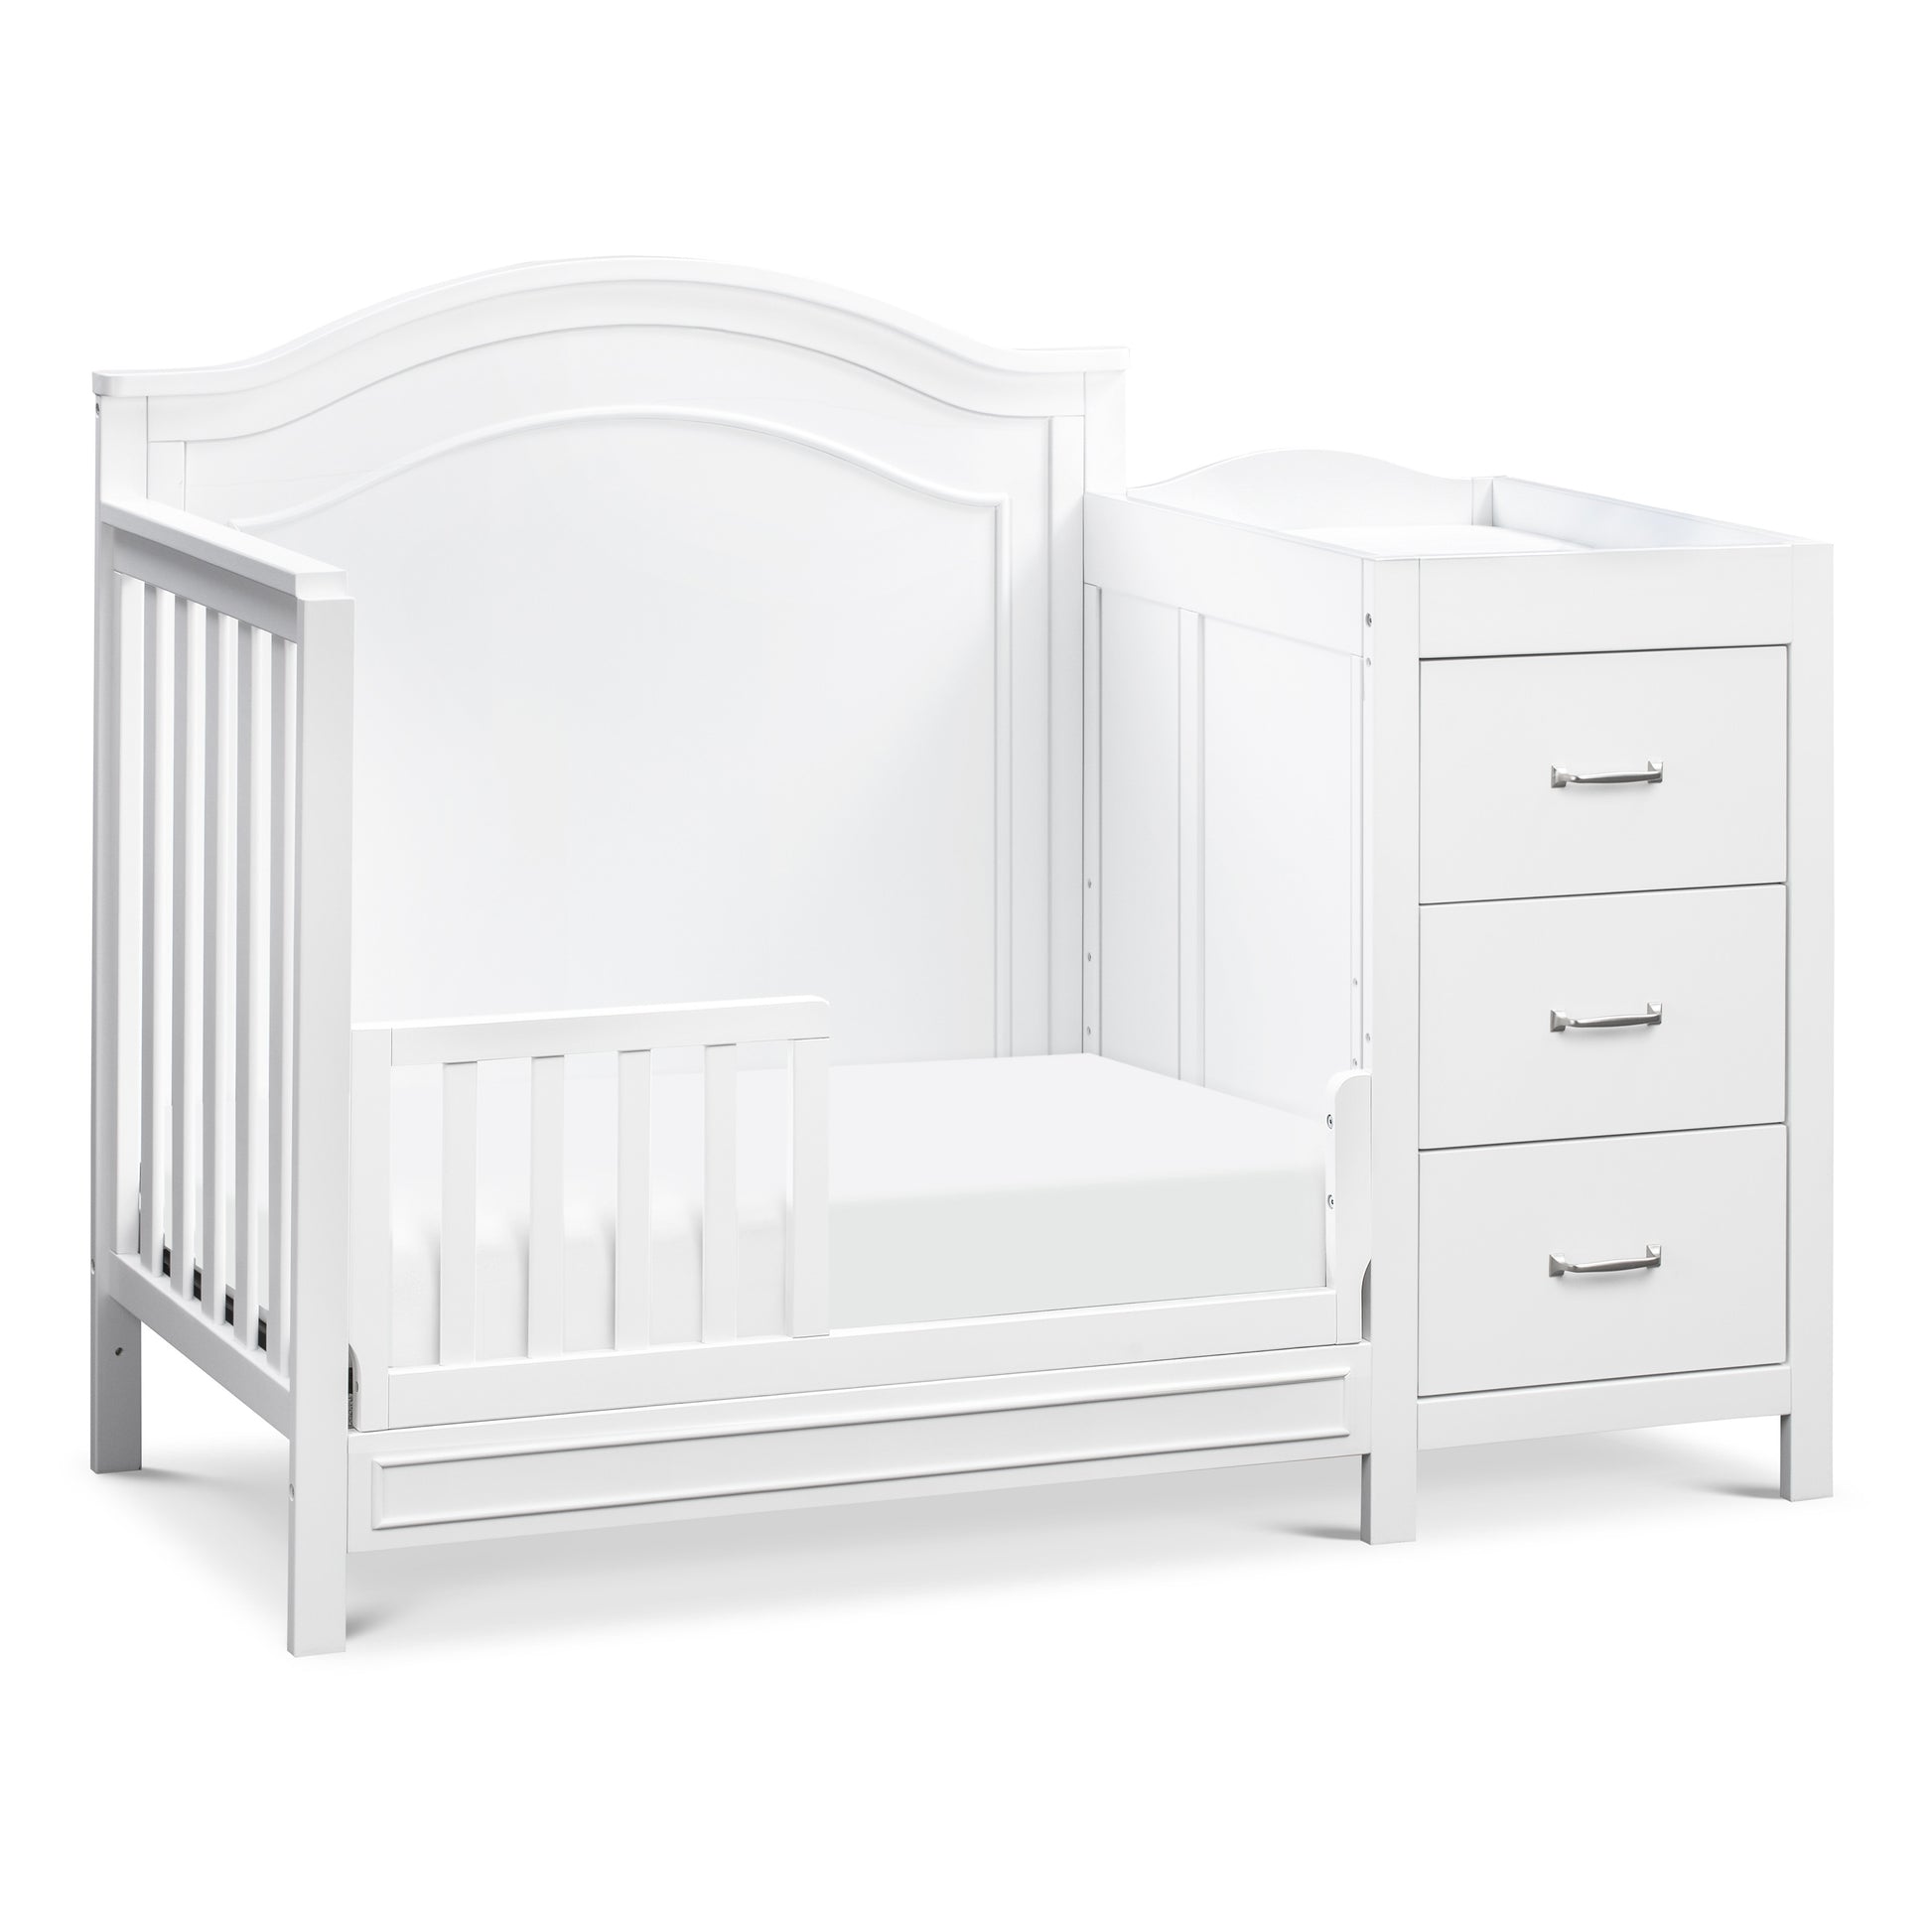 M12881W,Charlie 4-in-1 Convertible Mini Crib & Changer in White